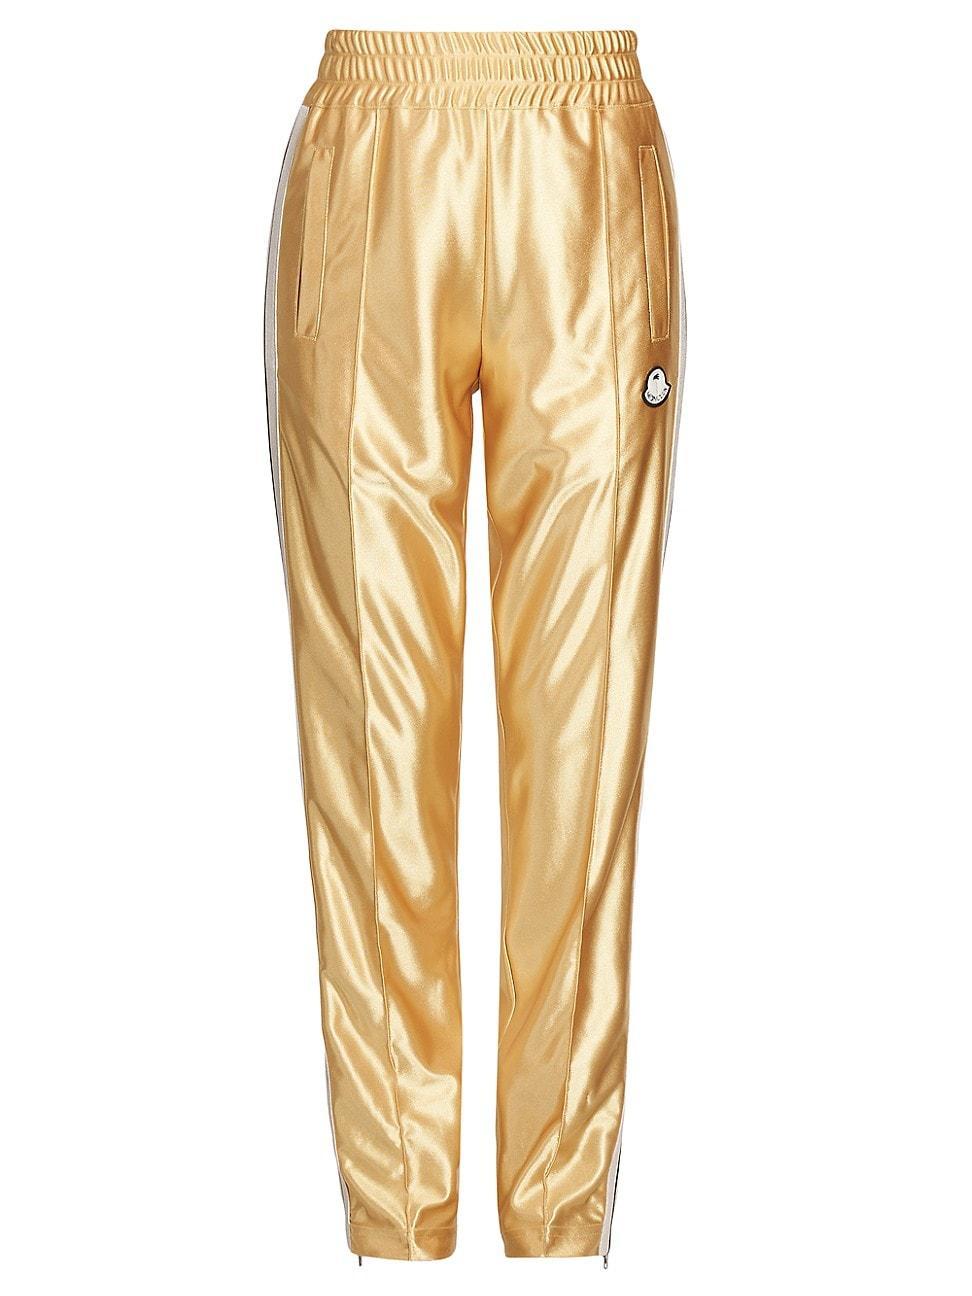 Womens 8 Moncler Palm Angels Logo Track Pants Product Image